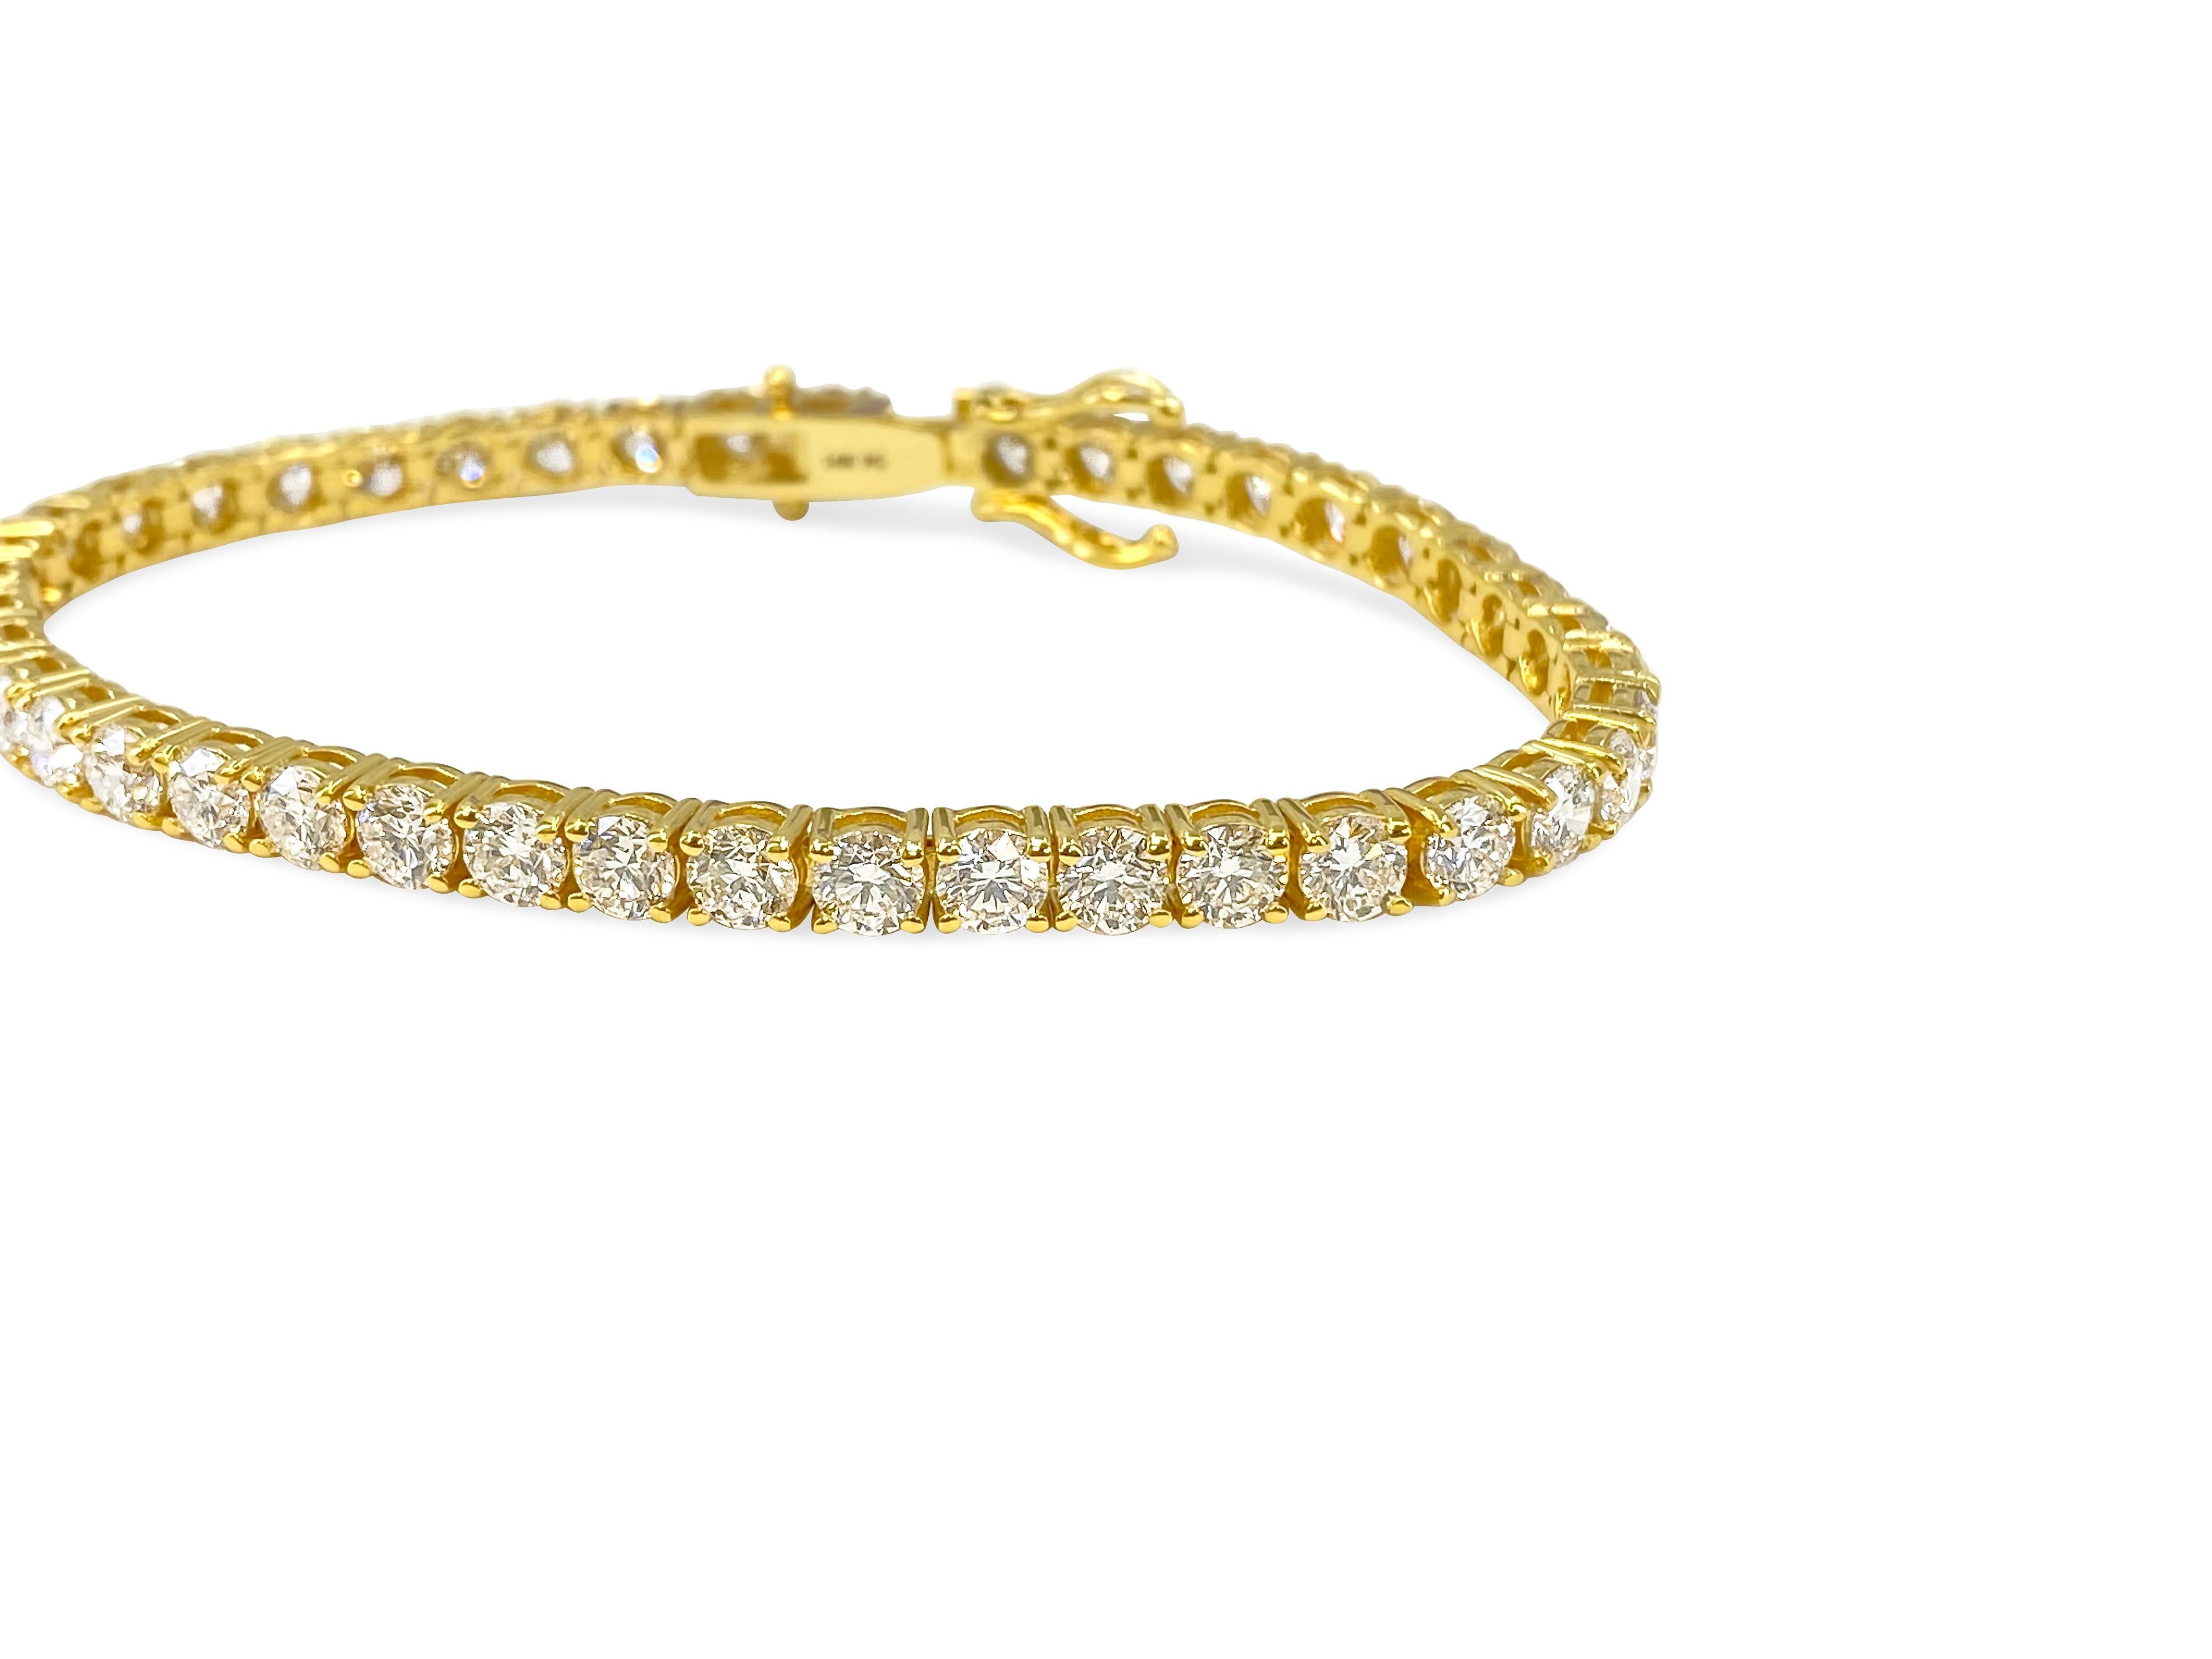 Crafted from luxurious 14-karat yellow gold, this exquisite bracelet boasts a total of 10.5 carats of dazzling diamonds. With very, very slight imperfections (VVS) and a color range of H-I, these natural earth-mined diamonds sparkle with